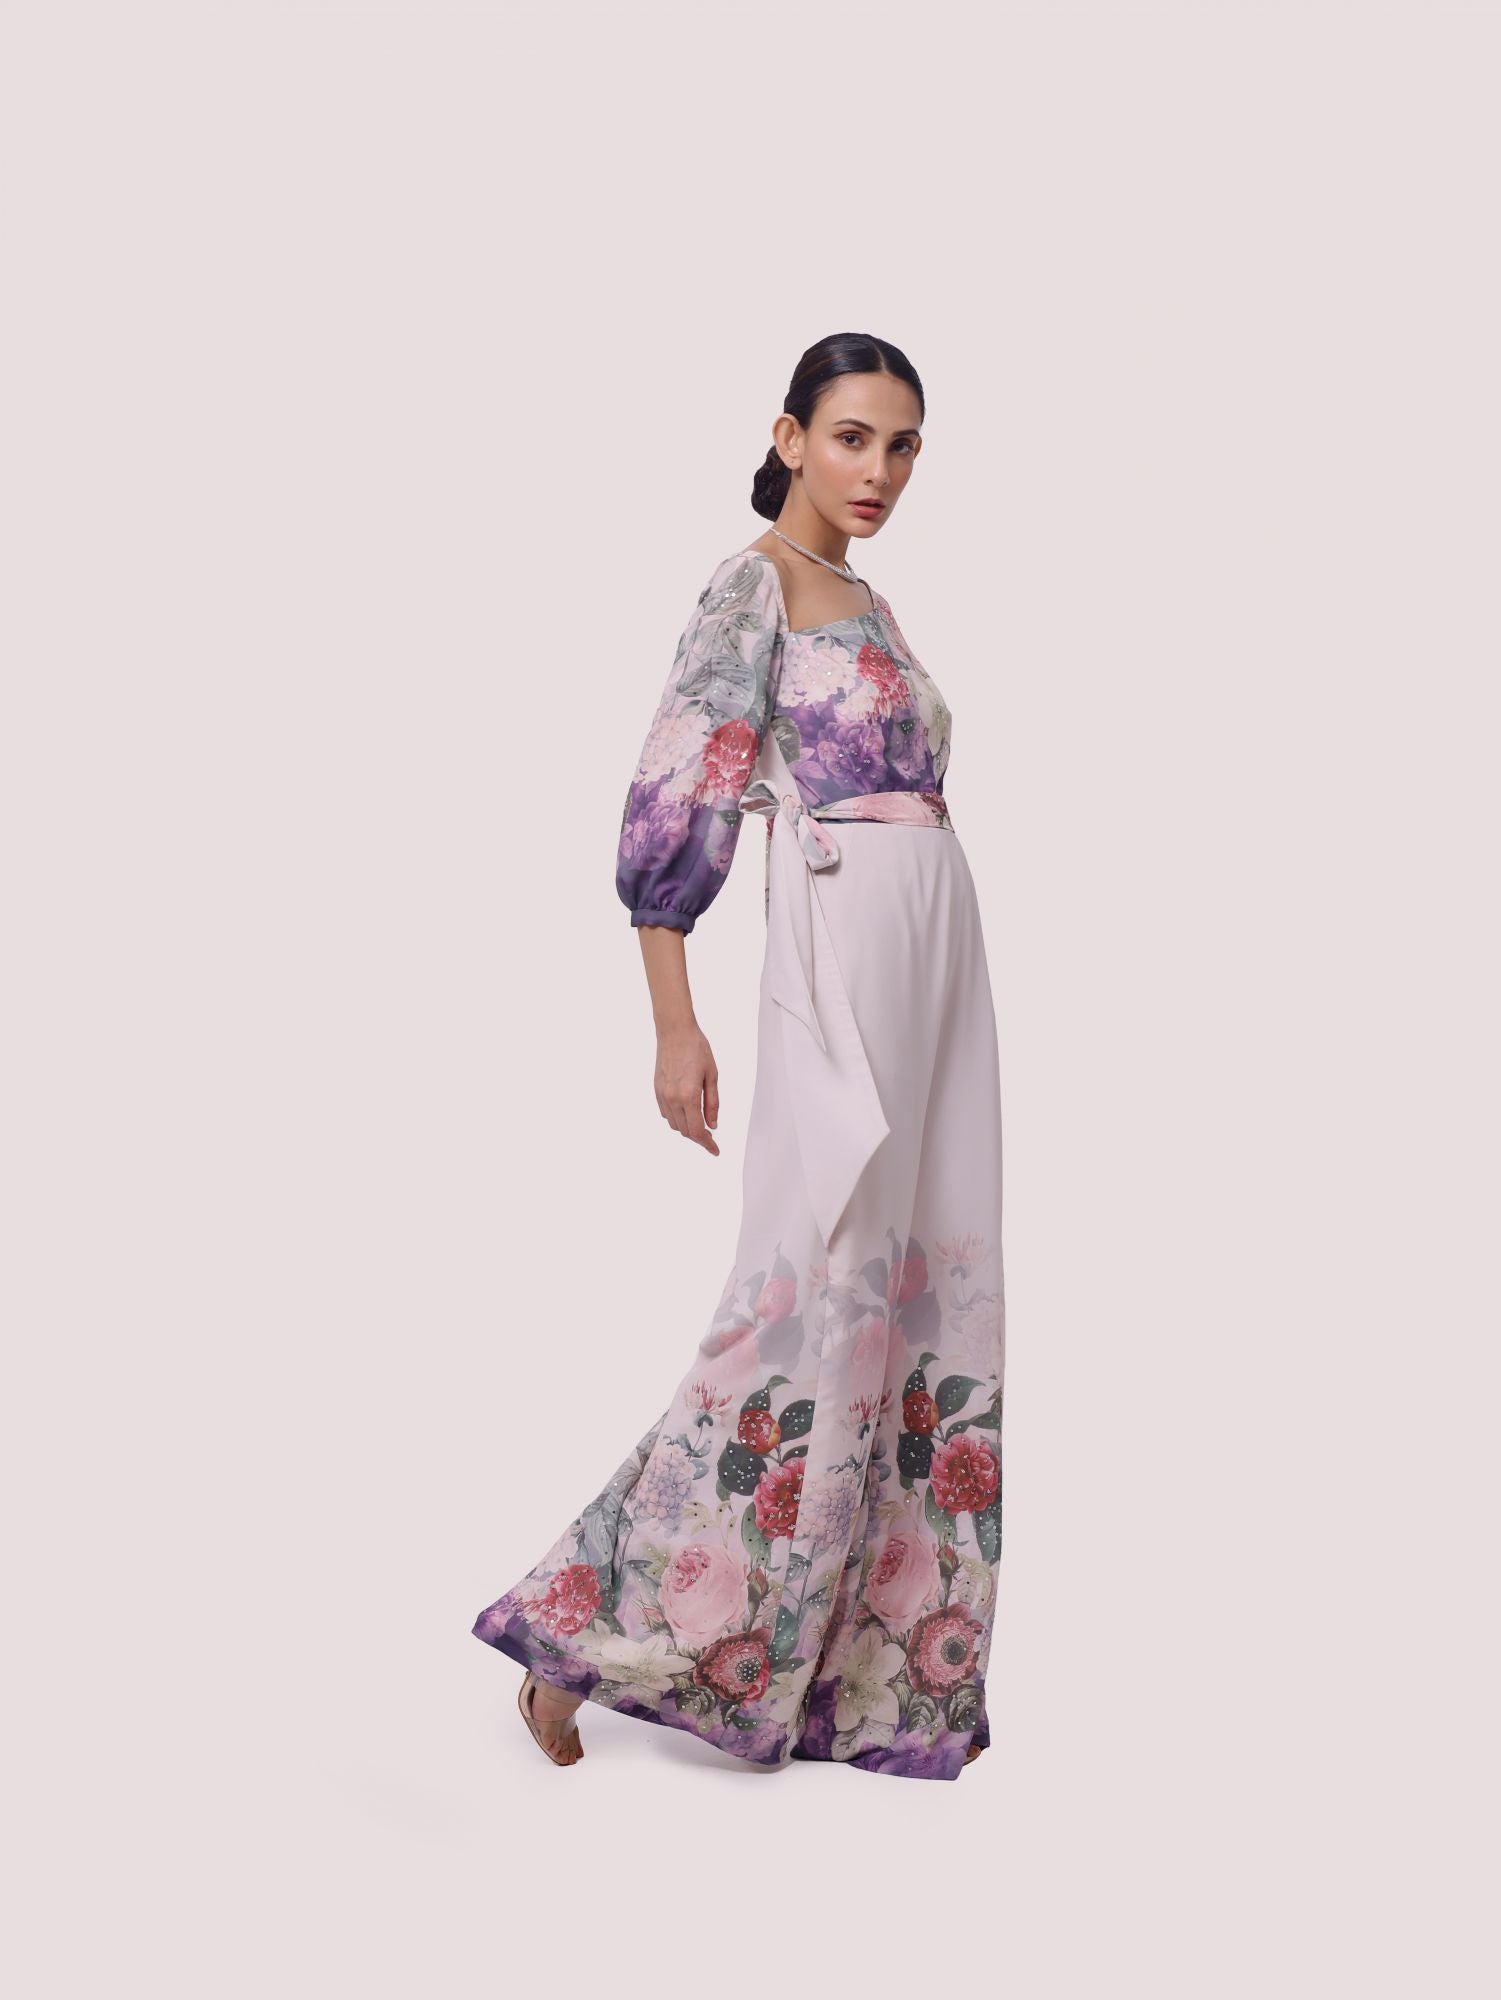 Buy stunning cream floral georgette jumpsuit online in USA. Shop the best and latest designs in embroidered sarees, designer sarees, Anarkali suit, lehengas, sharara suits for weddings and special occasions from Pure Elegance Indian fashion store in USA.-side